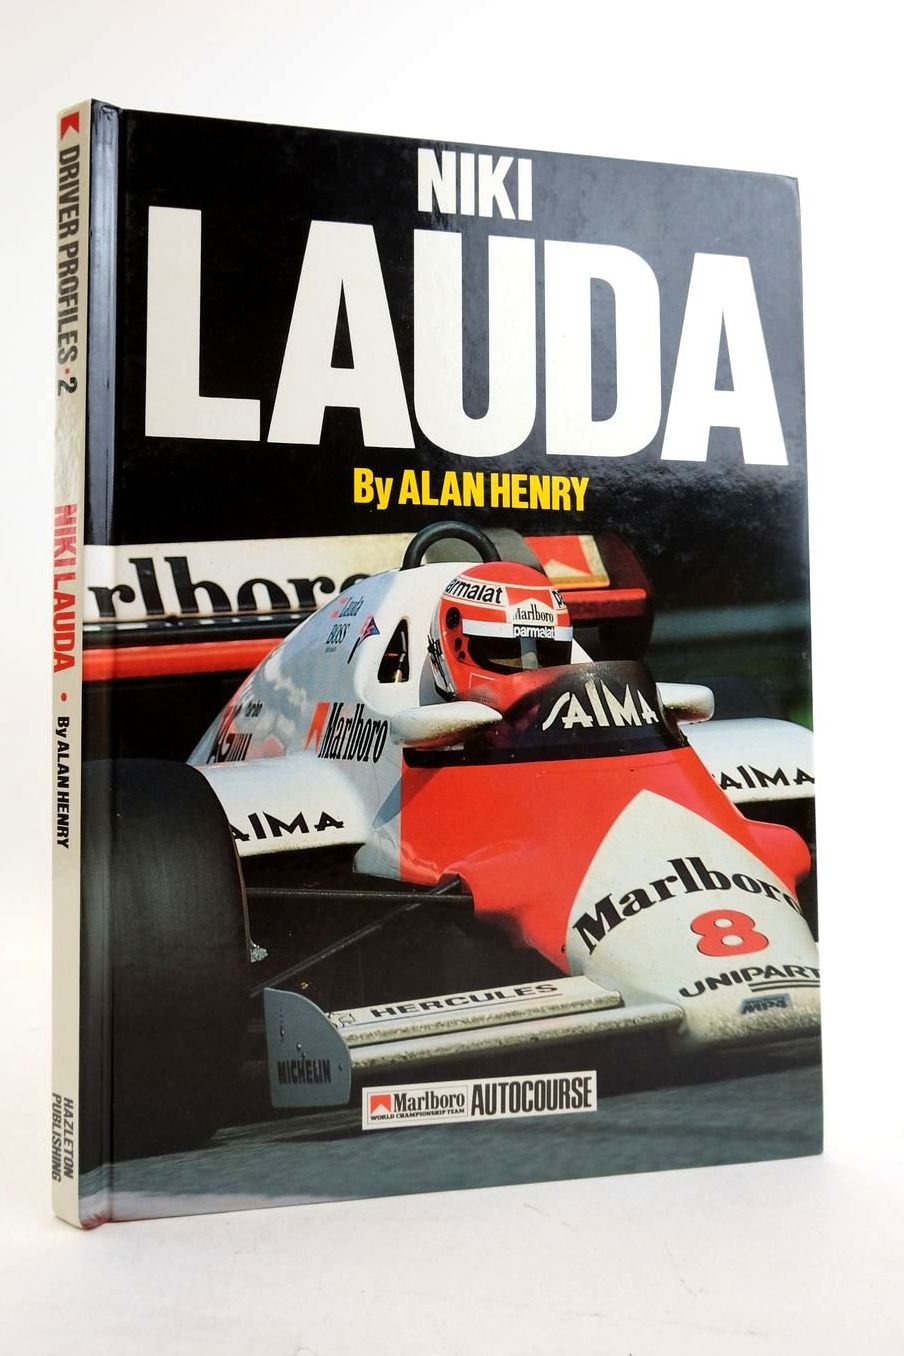 Photo of NIKI LAUDA written by Henry, Alan published by Hazleton Publishing (STOCK CODE: 1821712)  for sale by Stella & Rose's Books